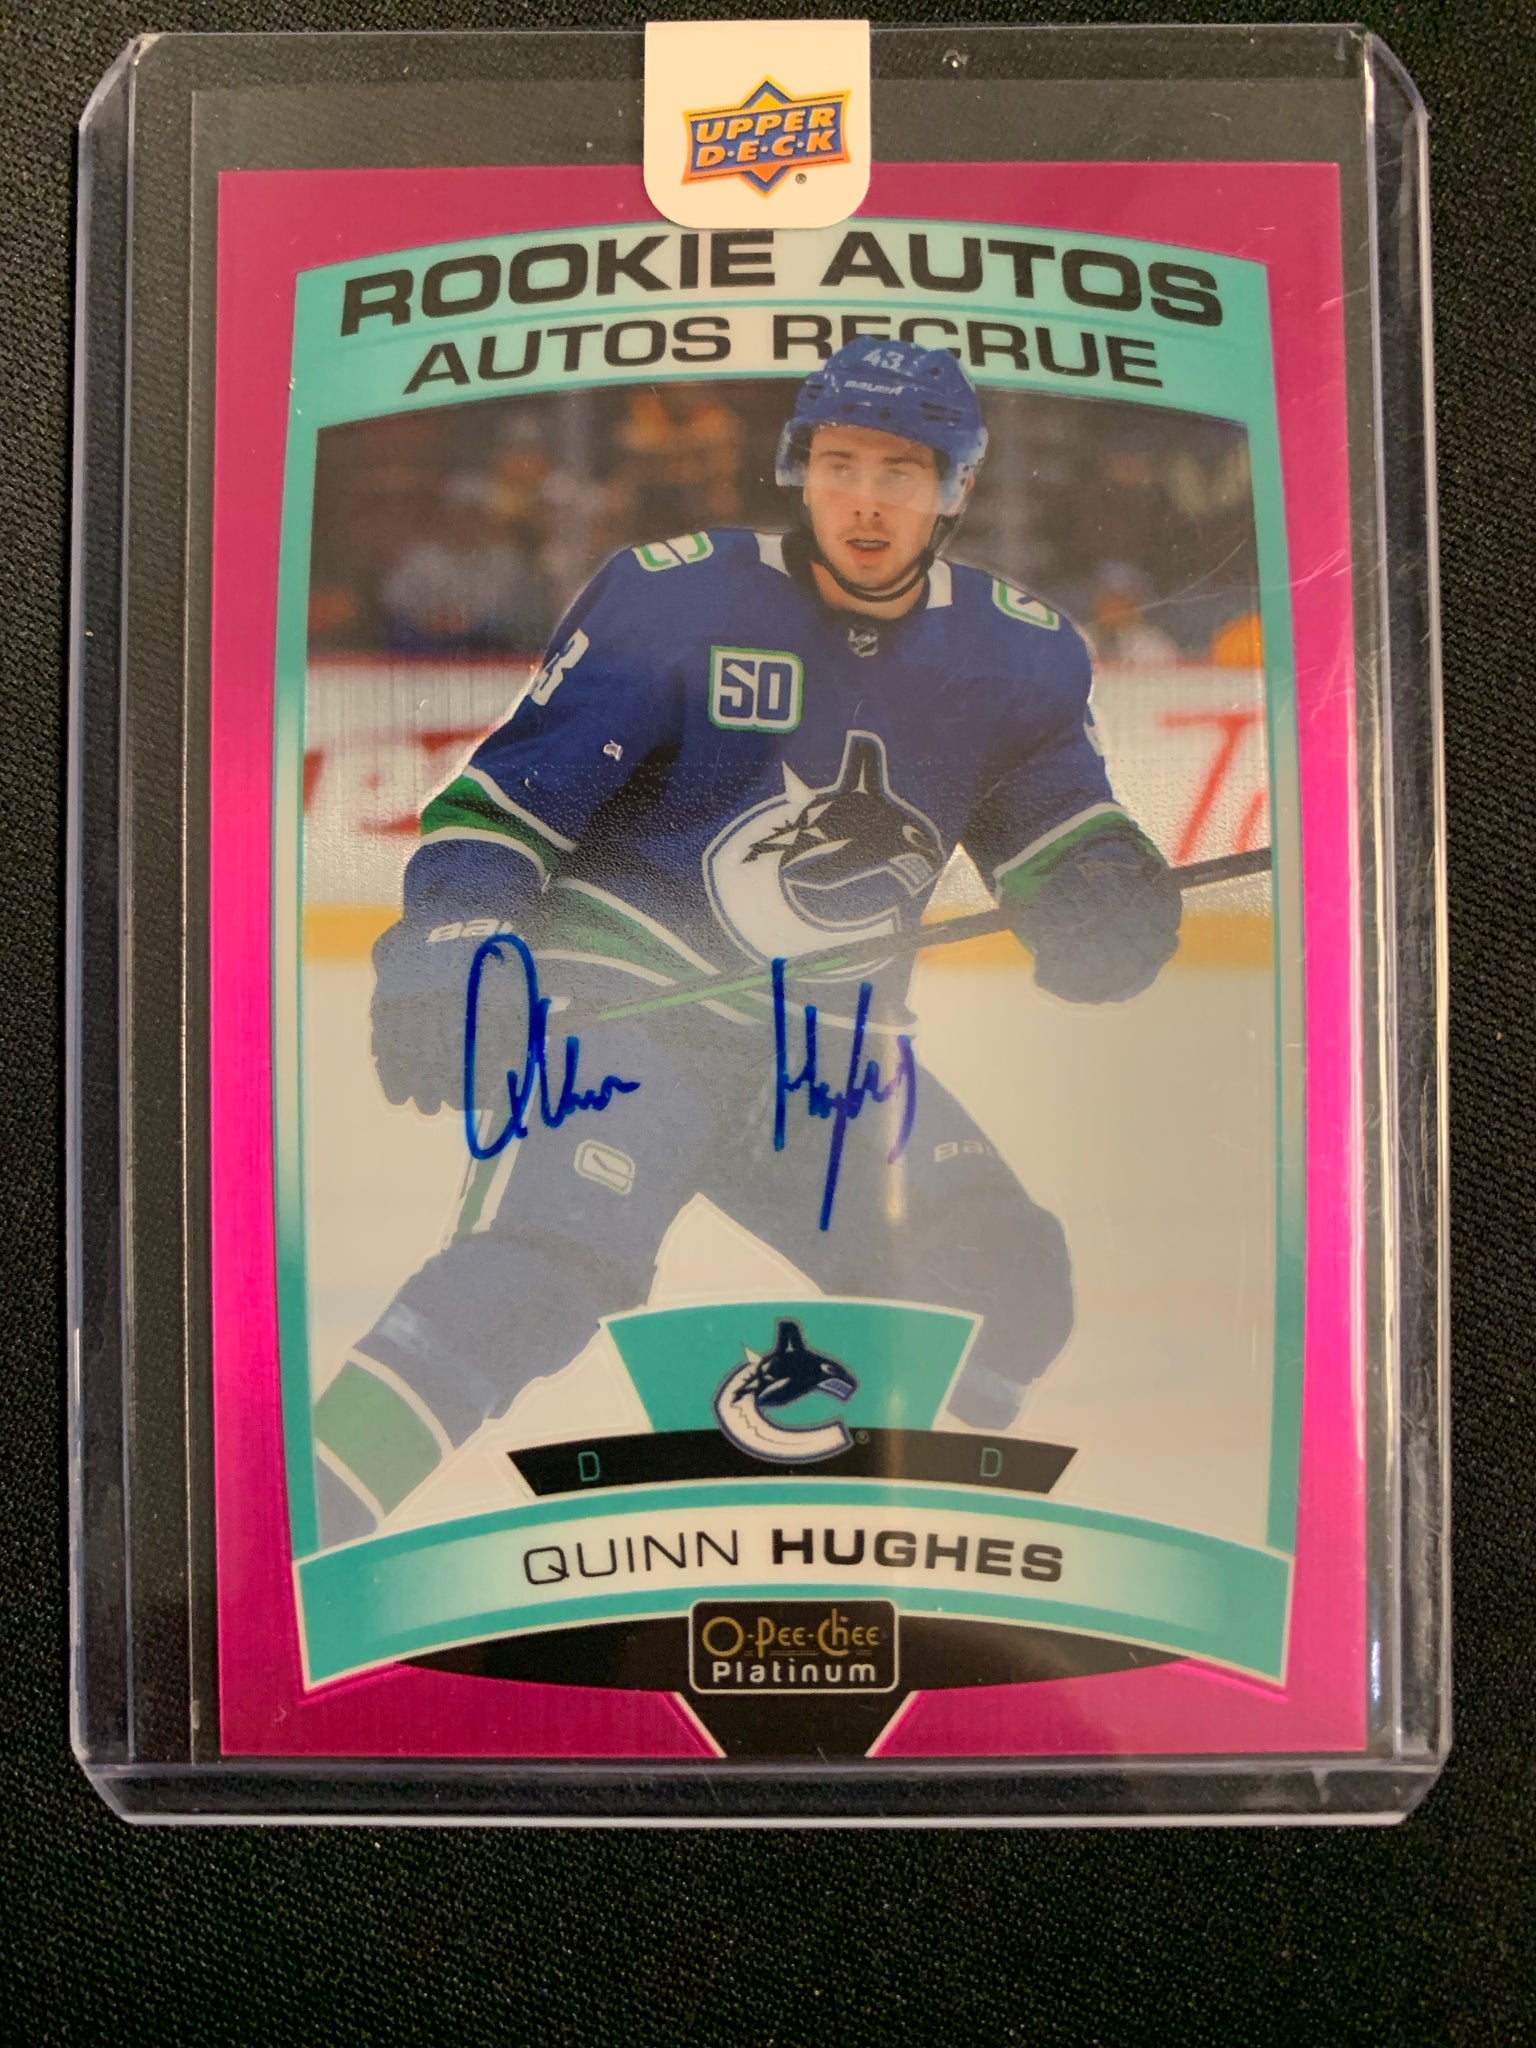 2019-20 UD OPC PLATINUM HOCKEY #R-QH VANCOUVER CANUCKS - QUINN HUGHES MATTE PINK ROOKIE AUTOS REDEMPTION NUMBERED 70/99